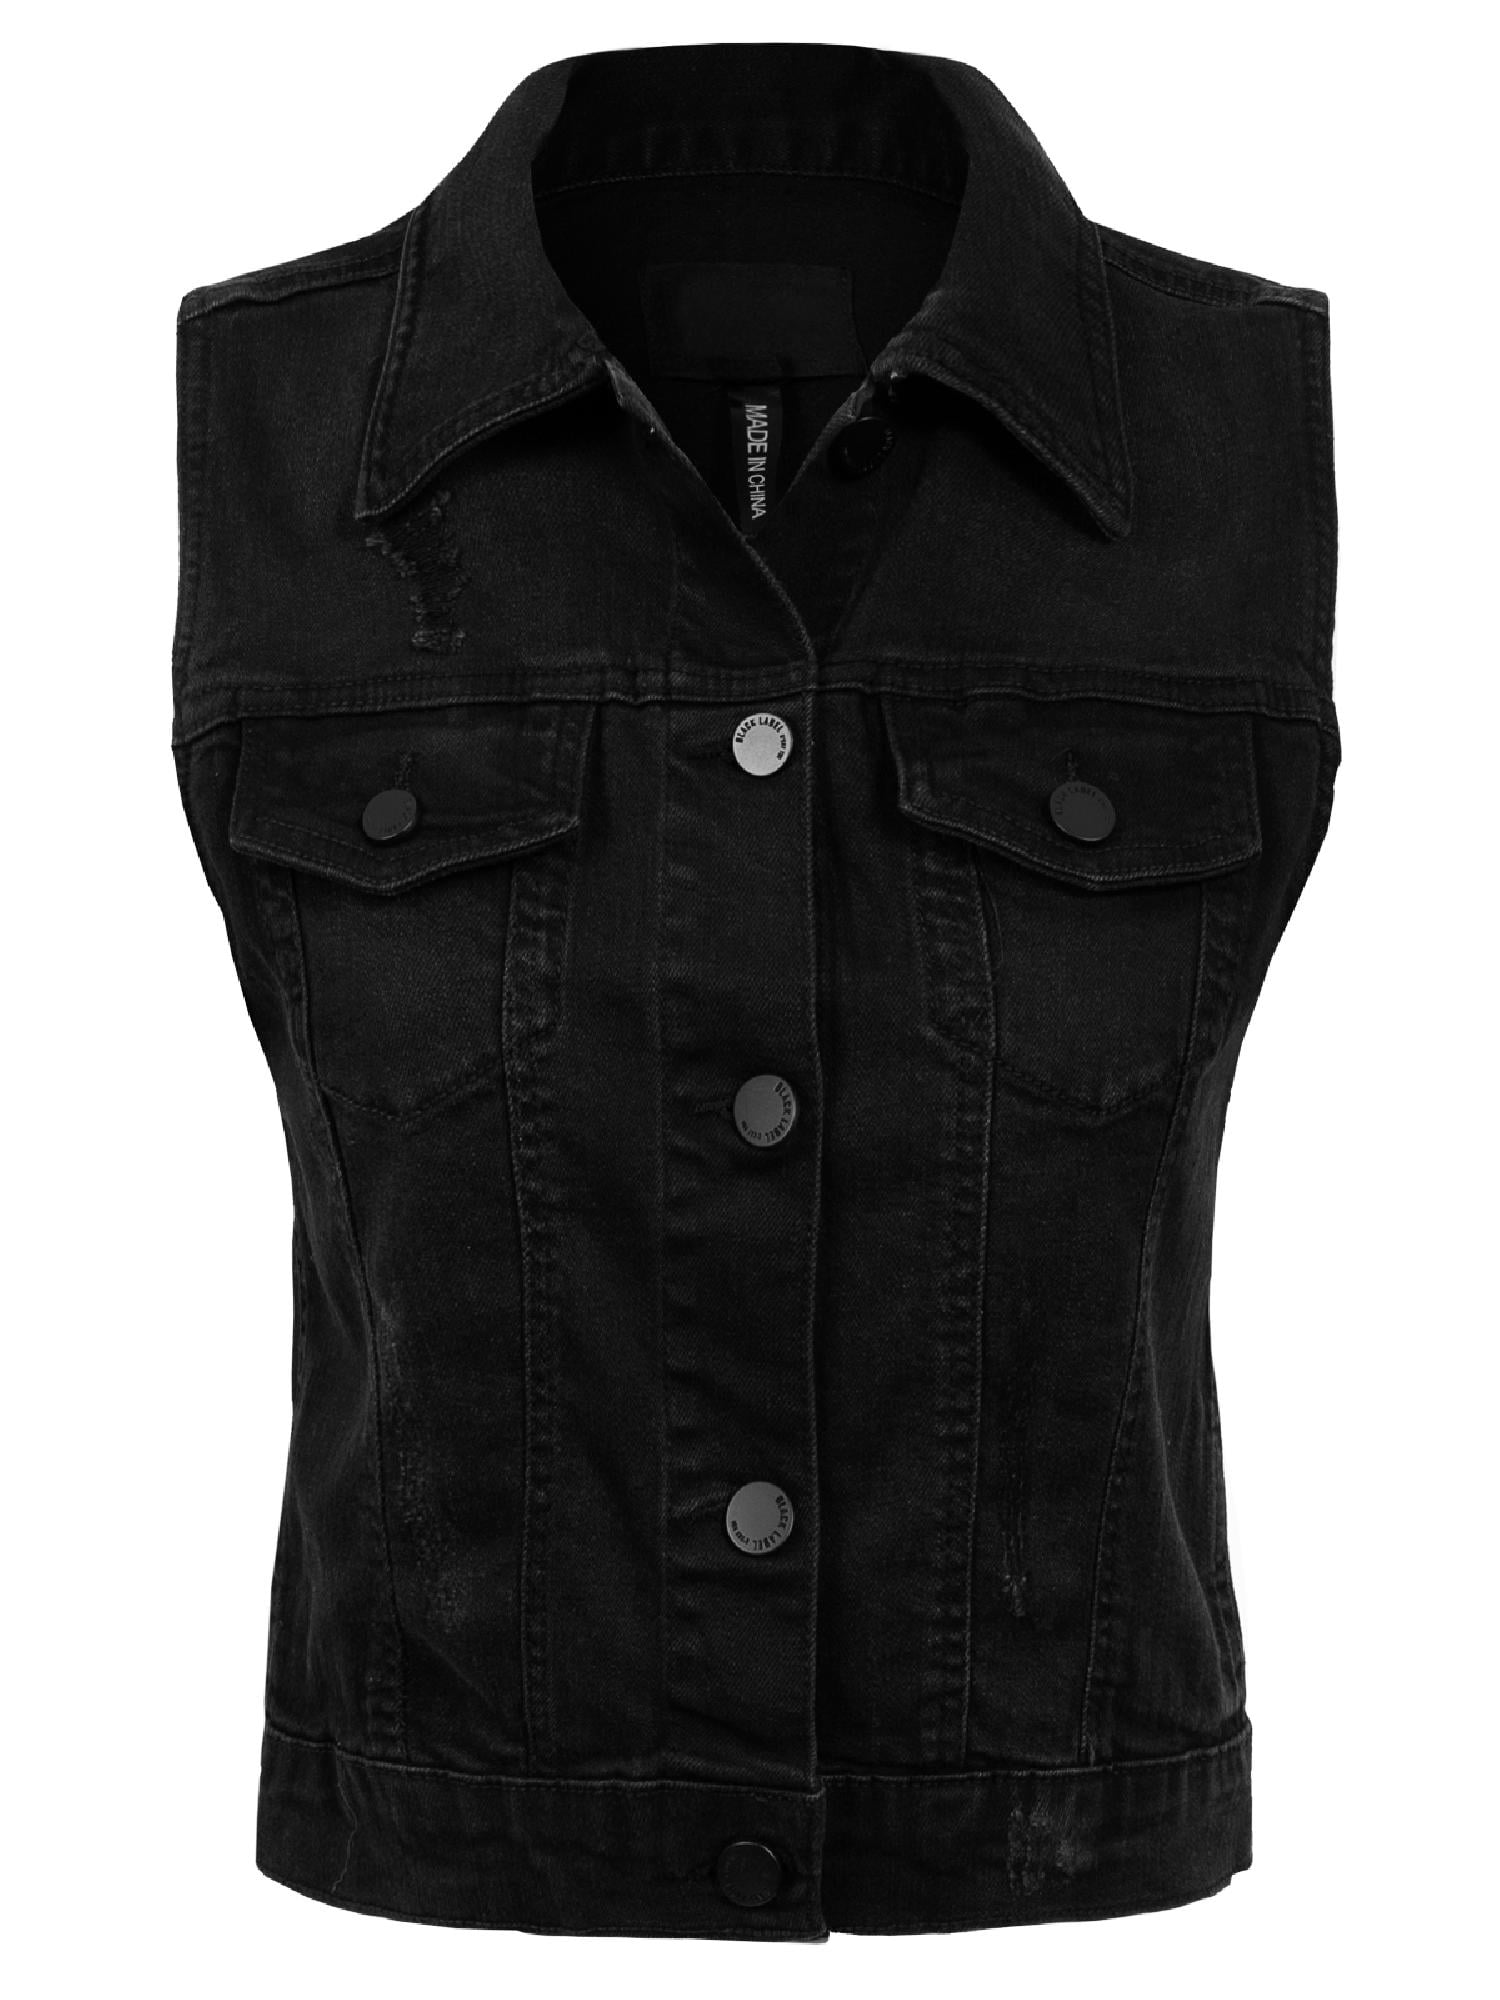 Made by Olivia Women's Sleeveless Button up Jean Denim Jacket Vest  Distressed Black S 